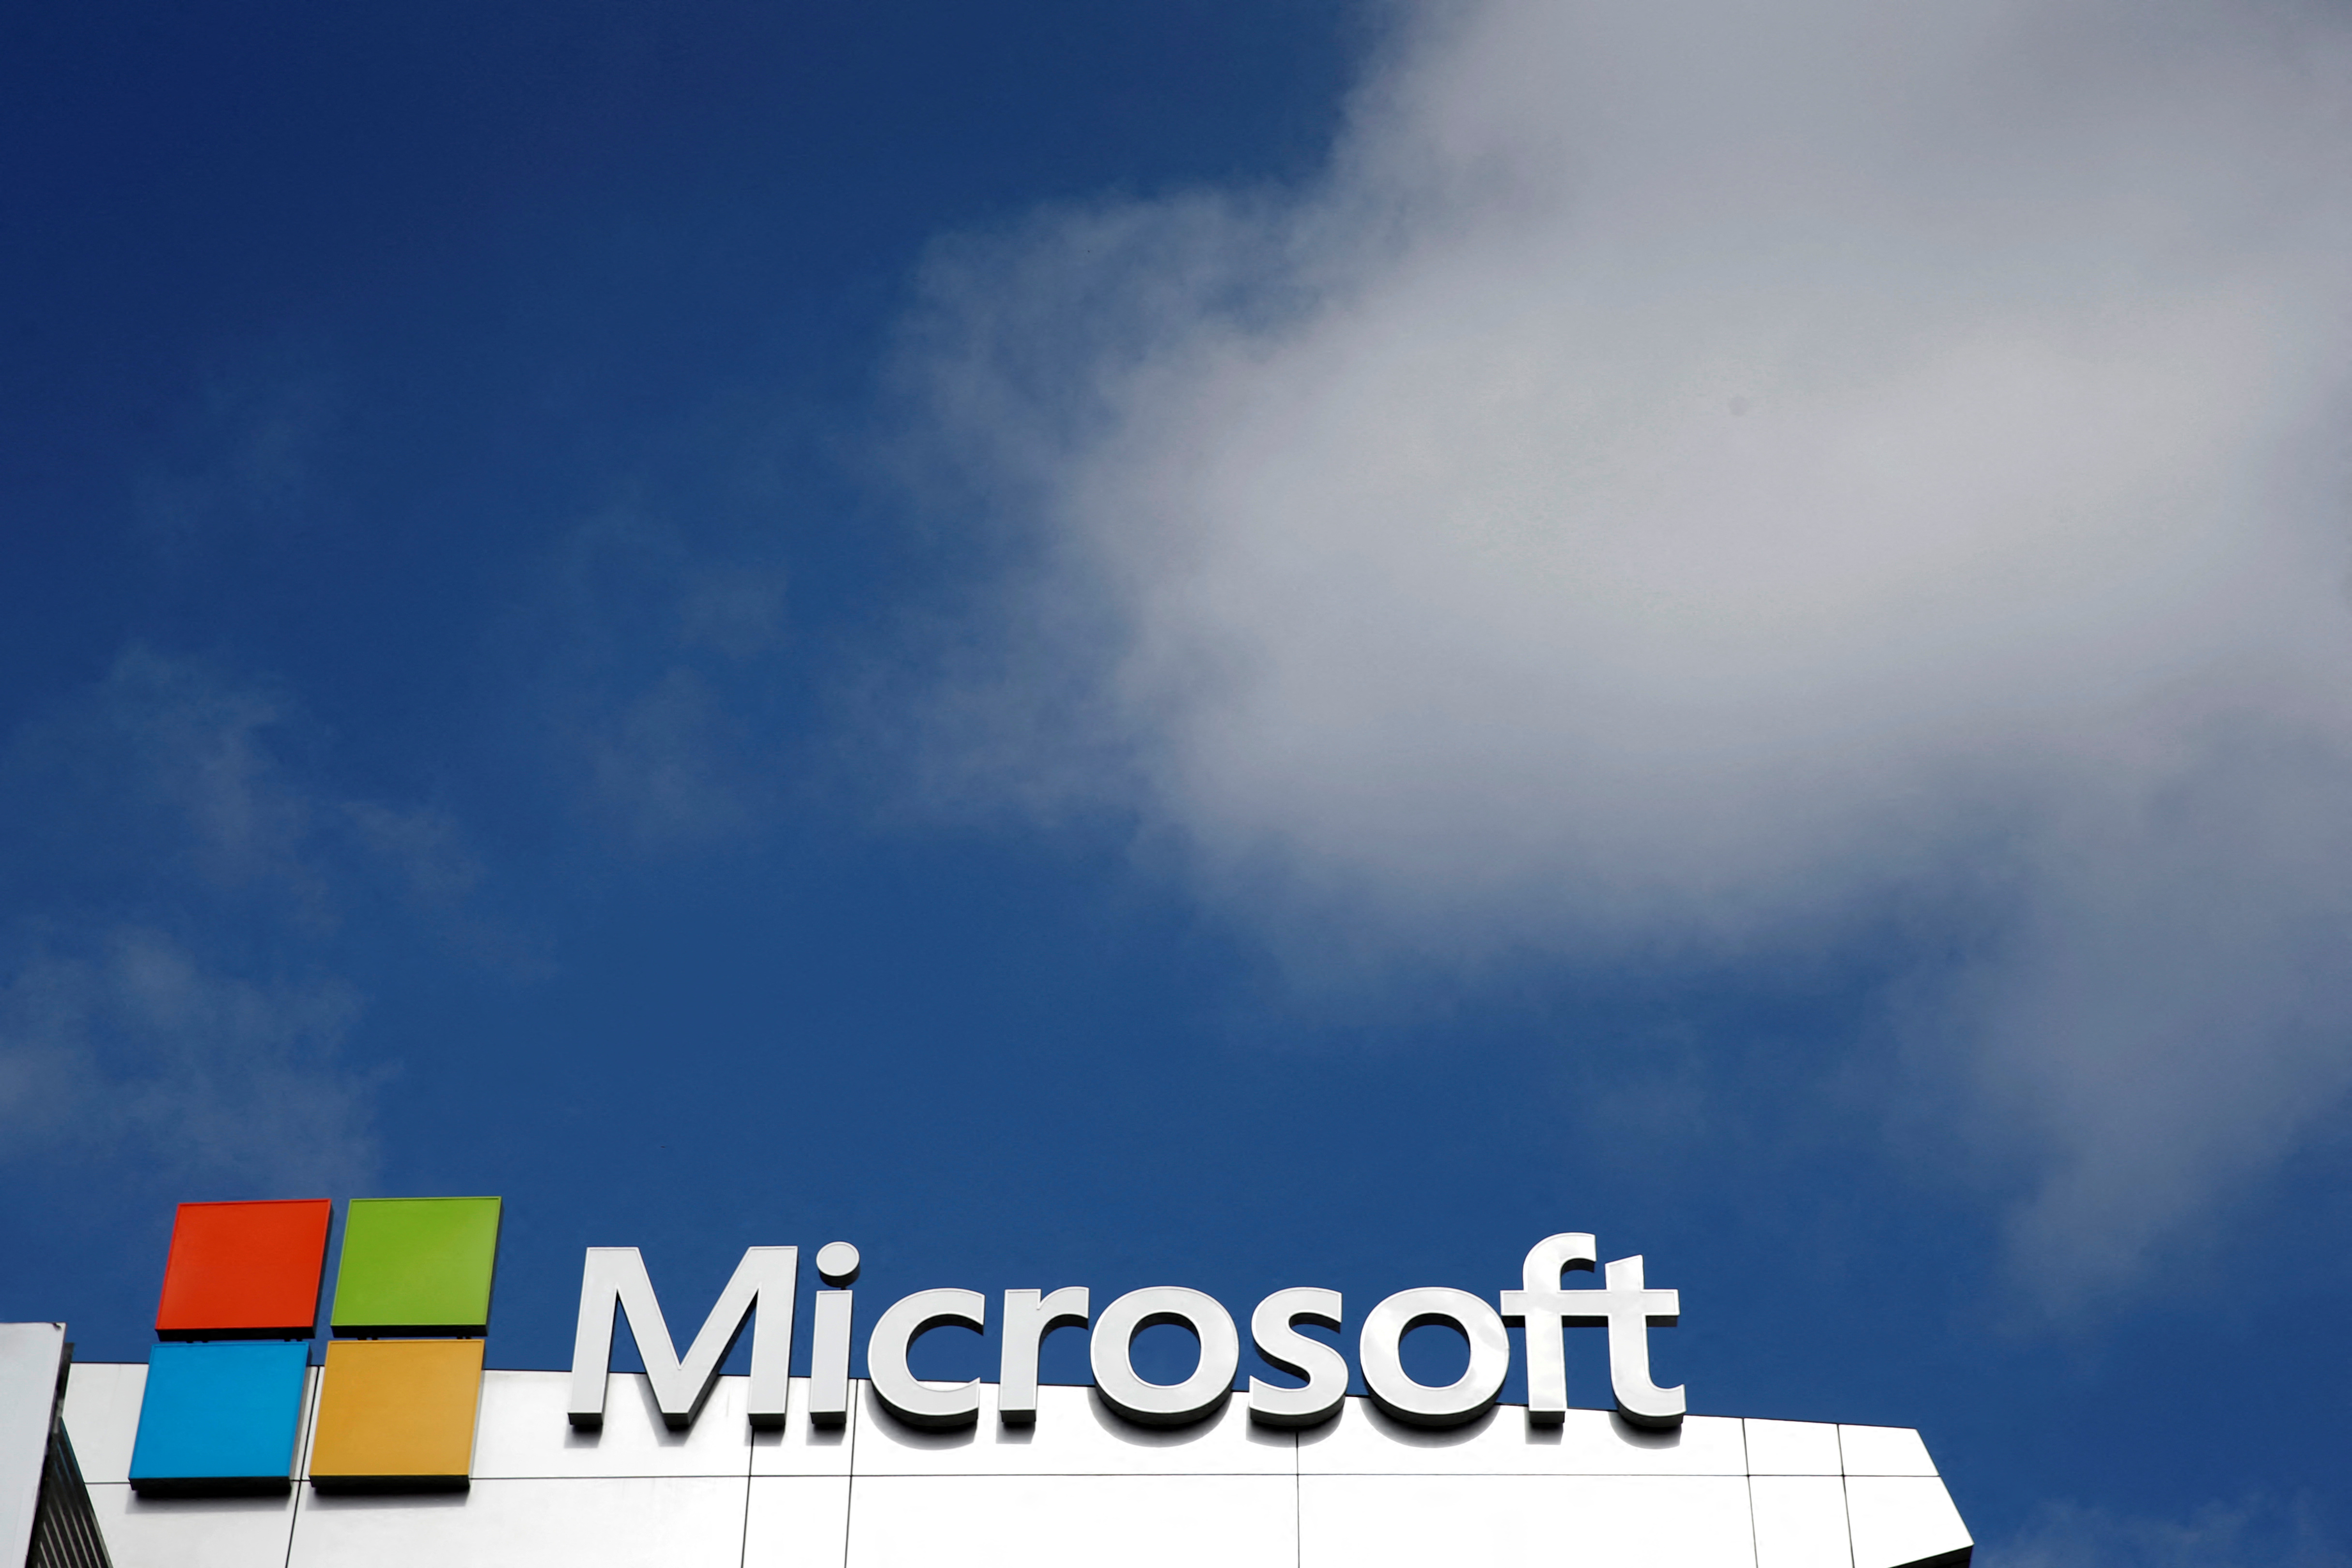 A Microsoft logo is seen next to a cloud in Los Angeles, California, U.S. June 14, 2016.